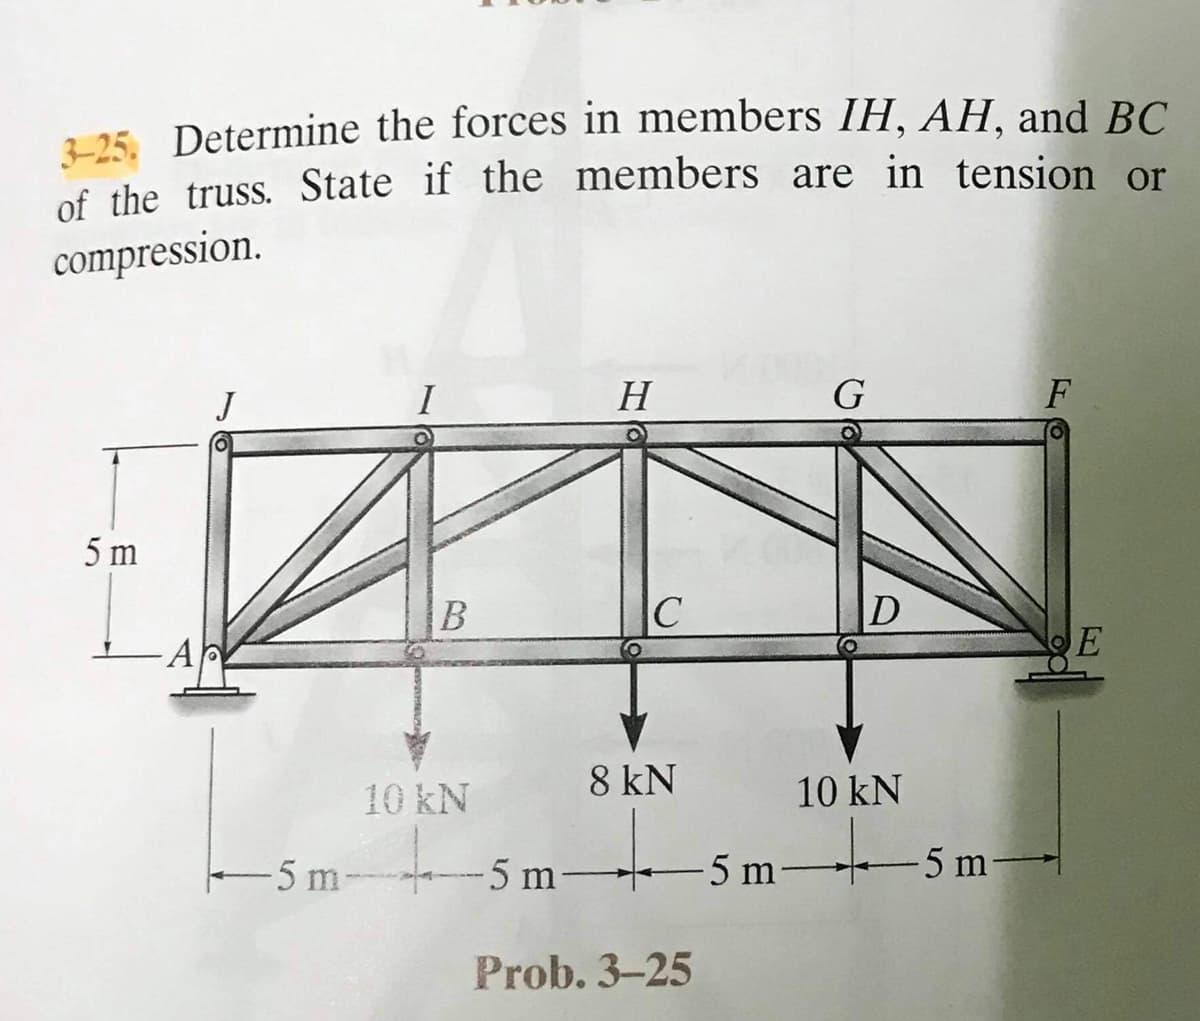 225 Determine the forces in members IH, AH, and BC.
of the truss. State if the members are in tension or
compression.
I
H
G
F
5 m
B
AP
E
10 kN
8 kN
10 kN
5 m 5 m 5 m-
5 m-
Prob. 3-25
